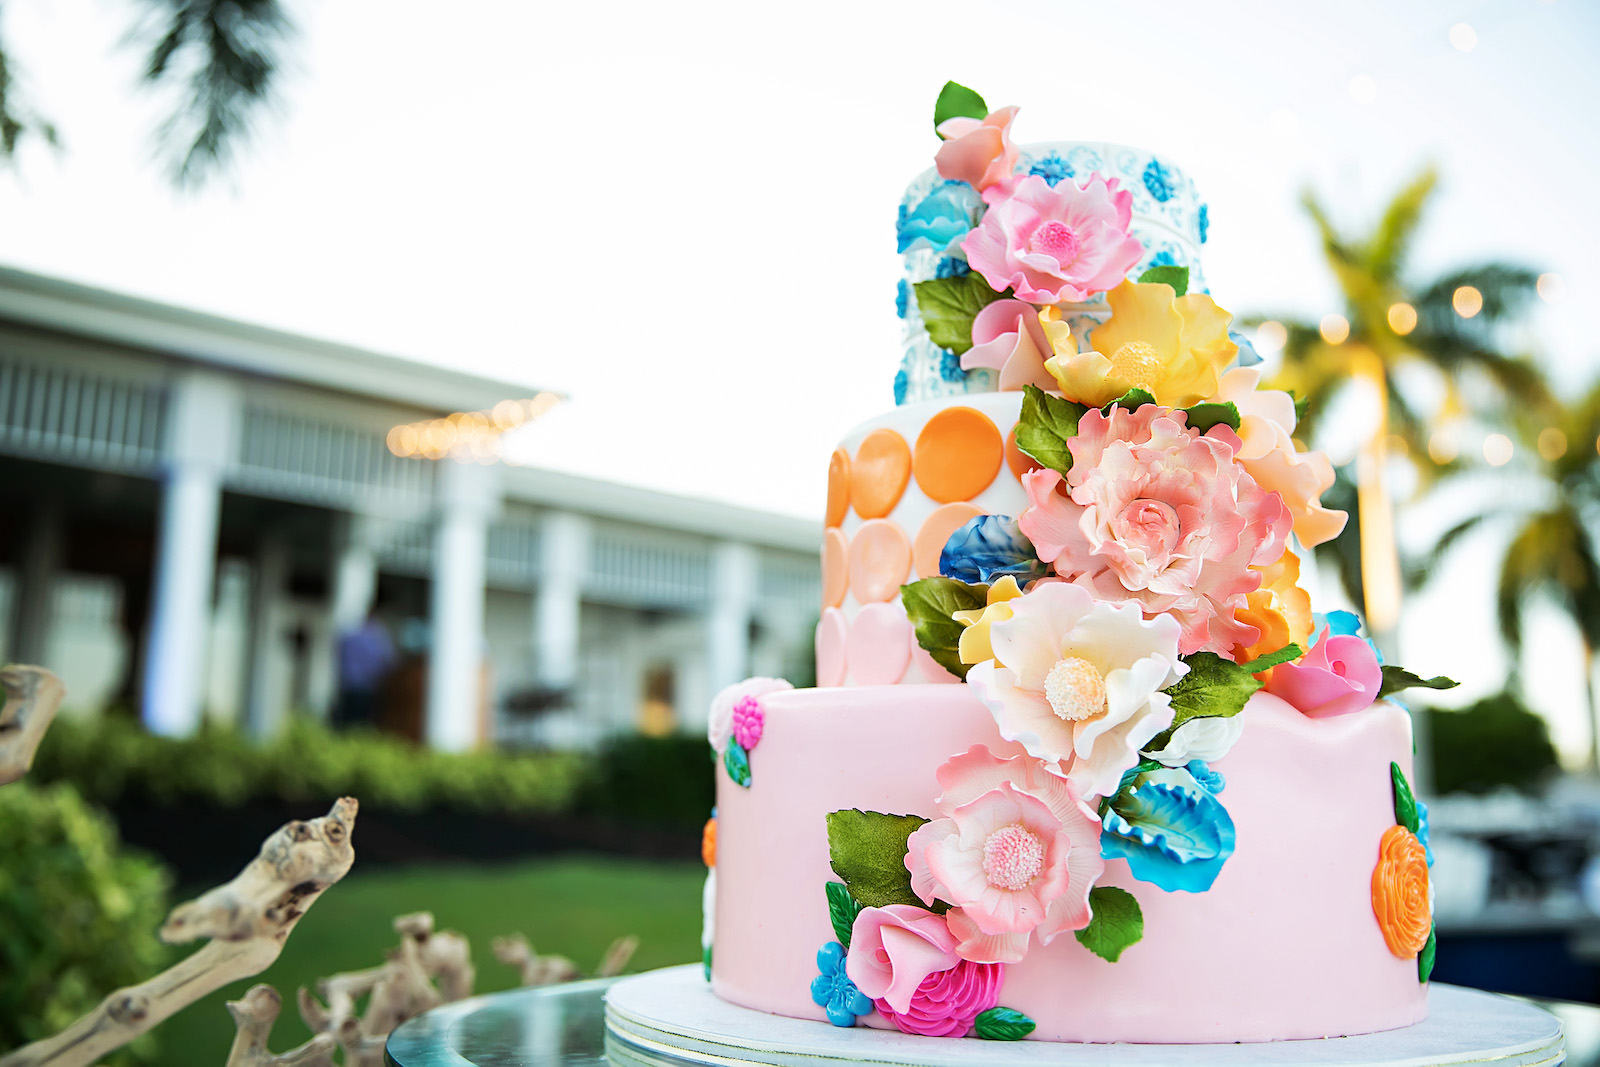 Three Tier Bright and Vibrant Floral Cake with Blue, Orange, and Pink Detailing